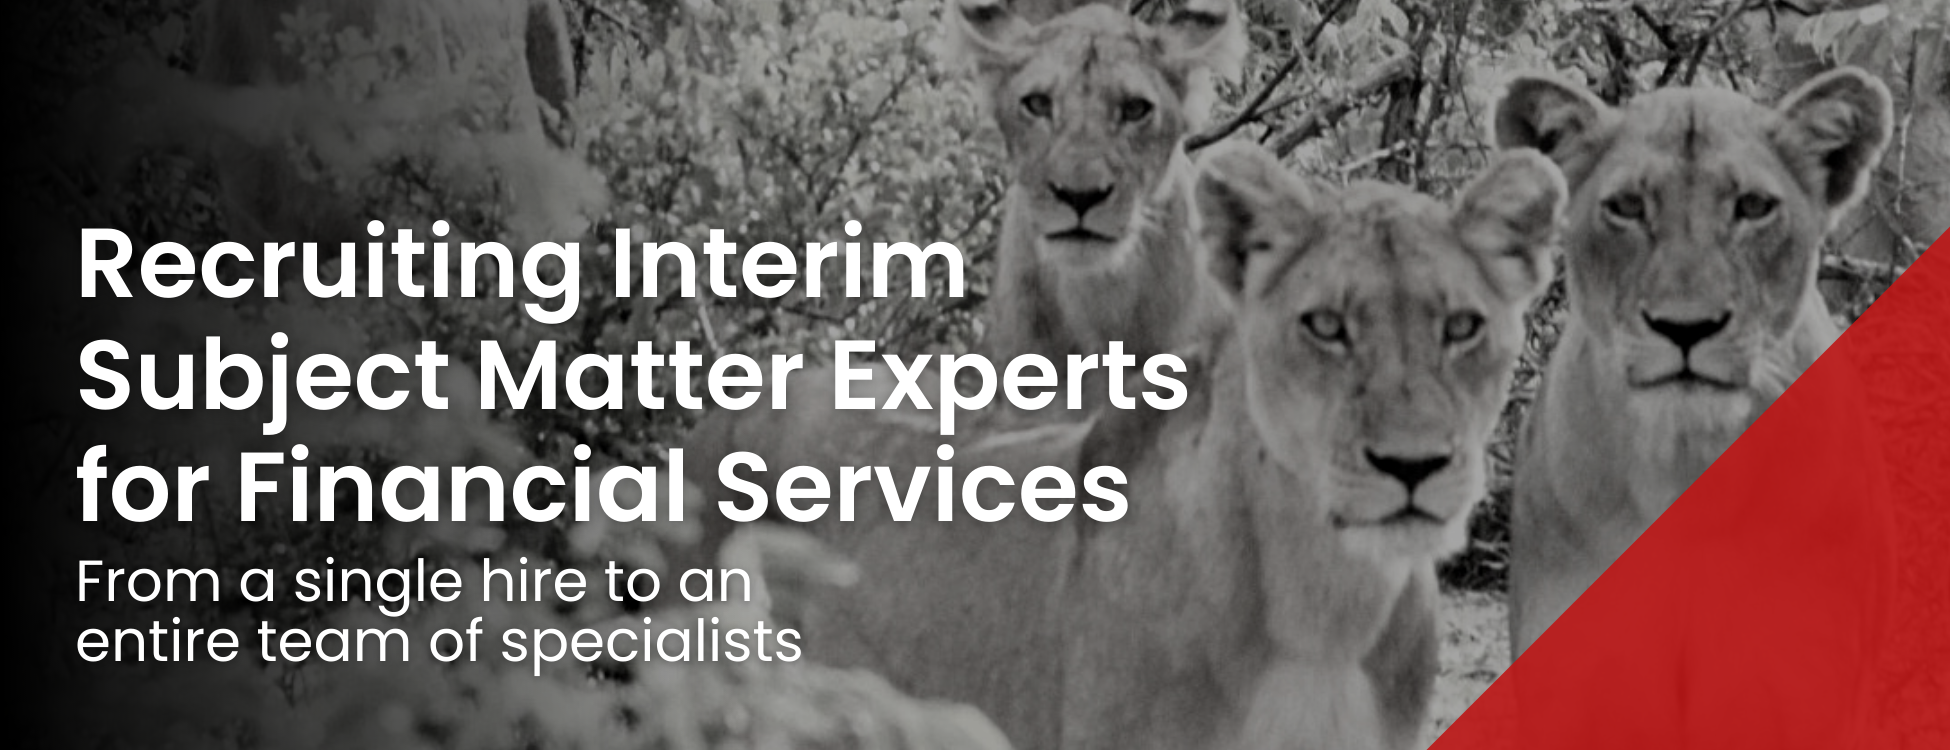 Recruiting Interim Subject Matter Experts for Financial Services